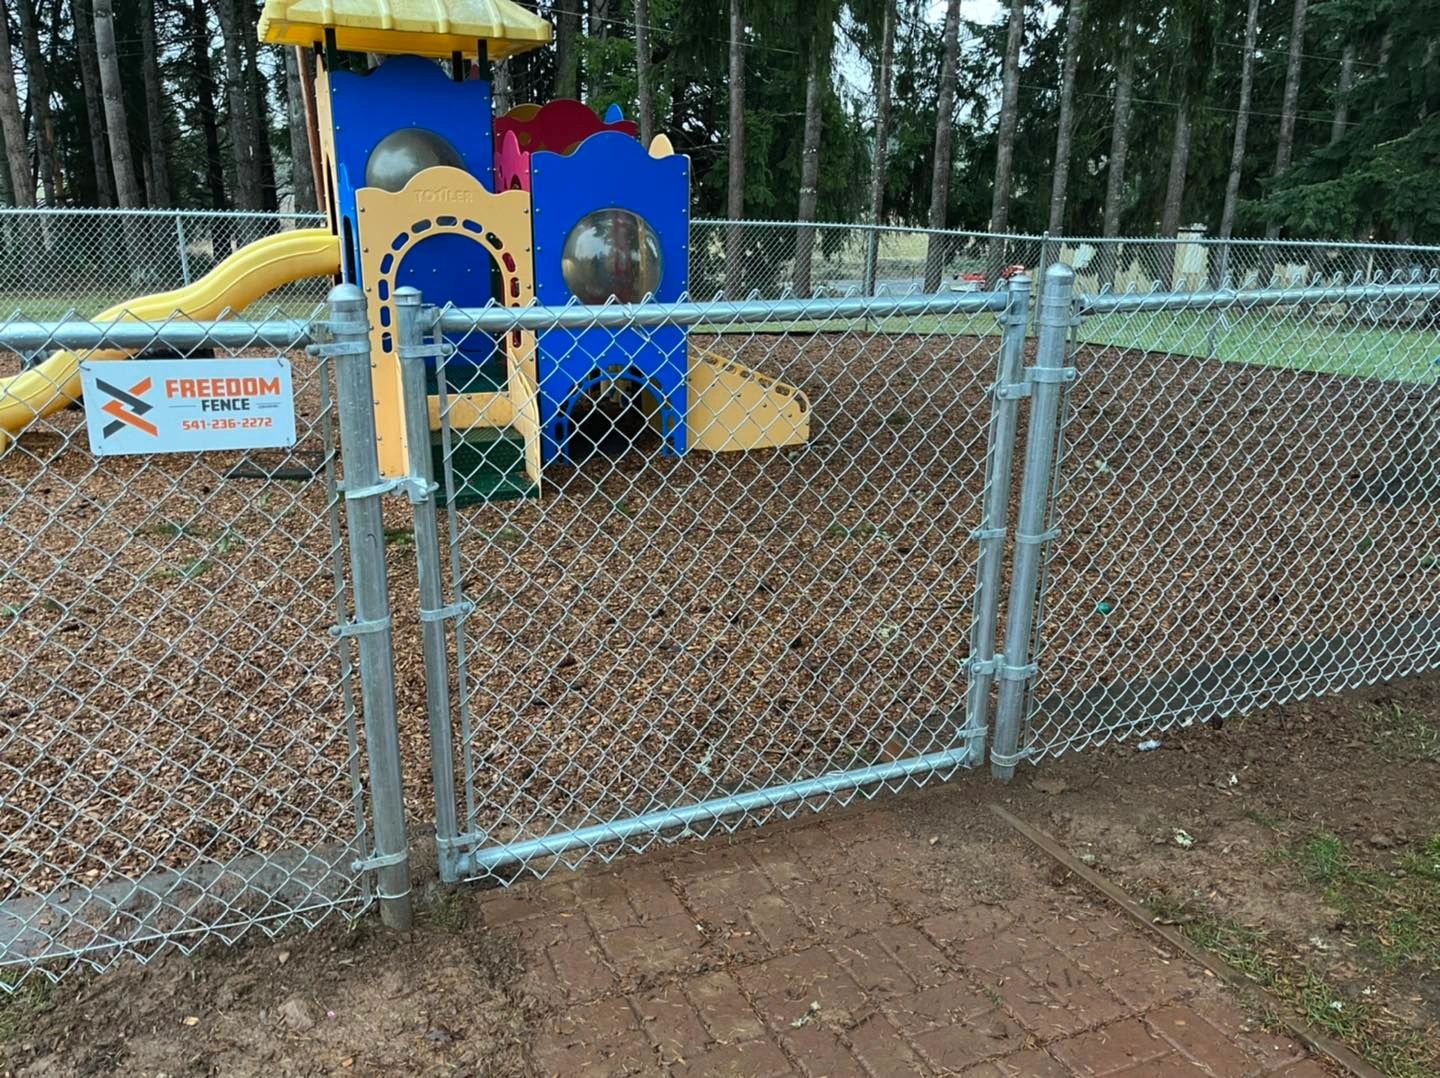 Chain Link Fence at a playground in Eugene, Oregon